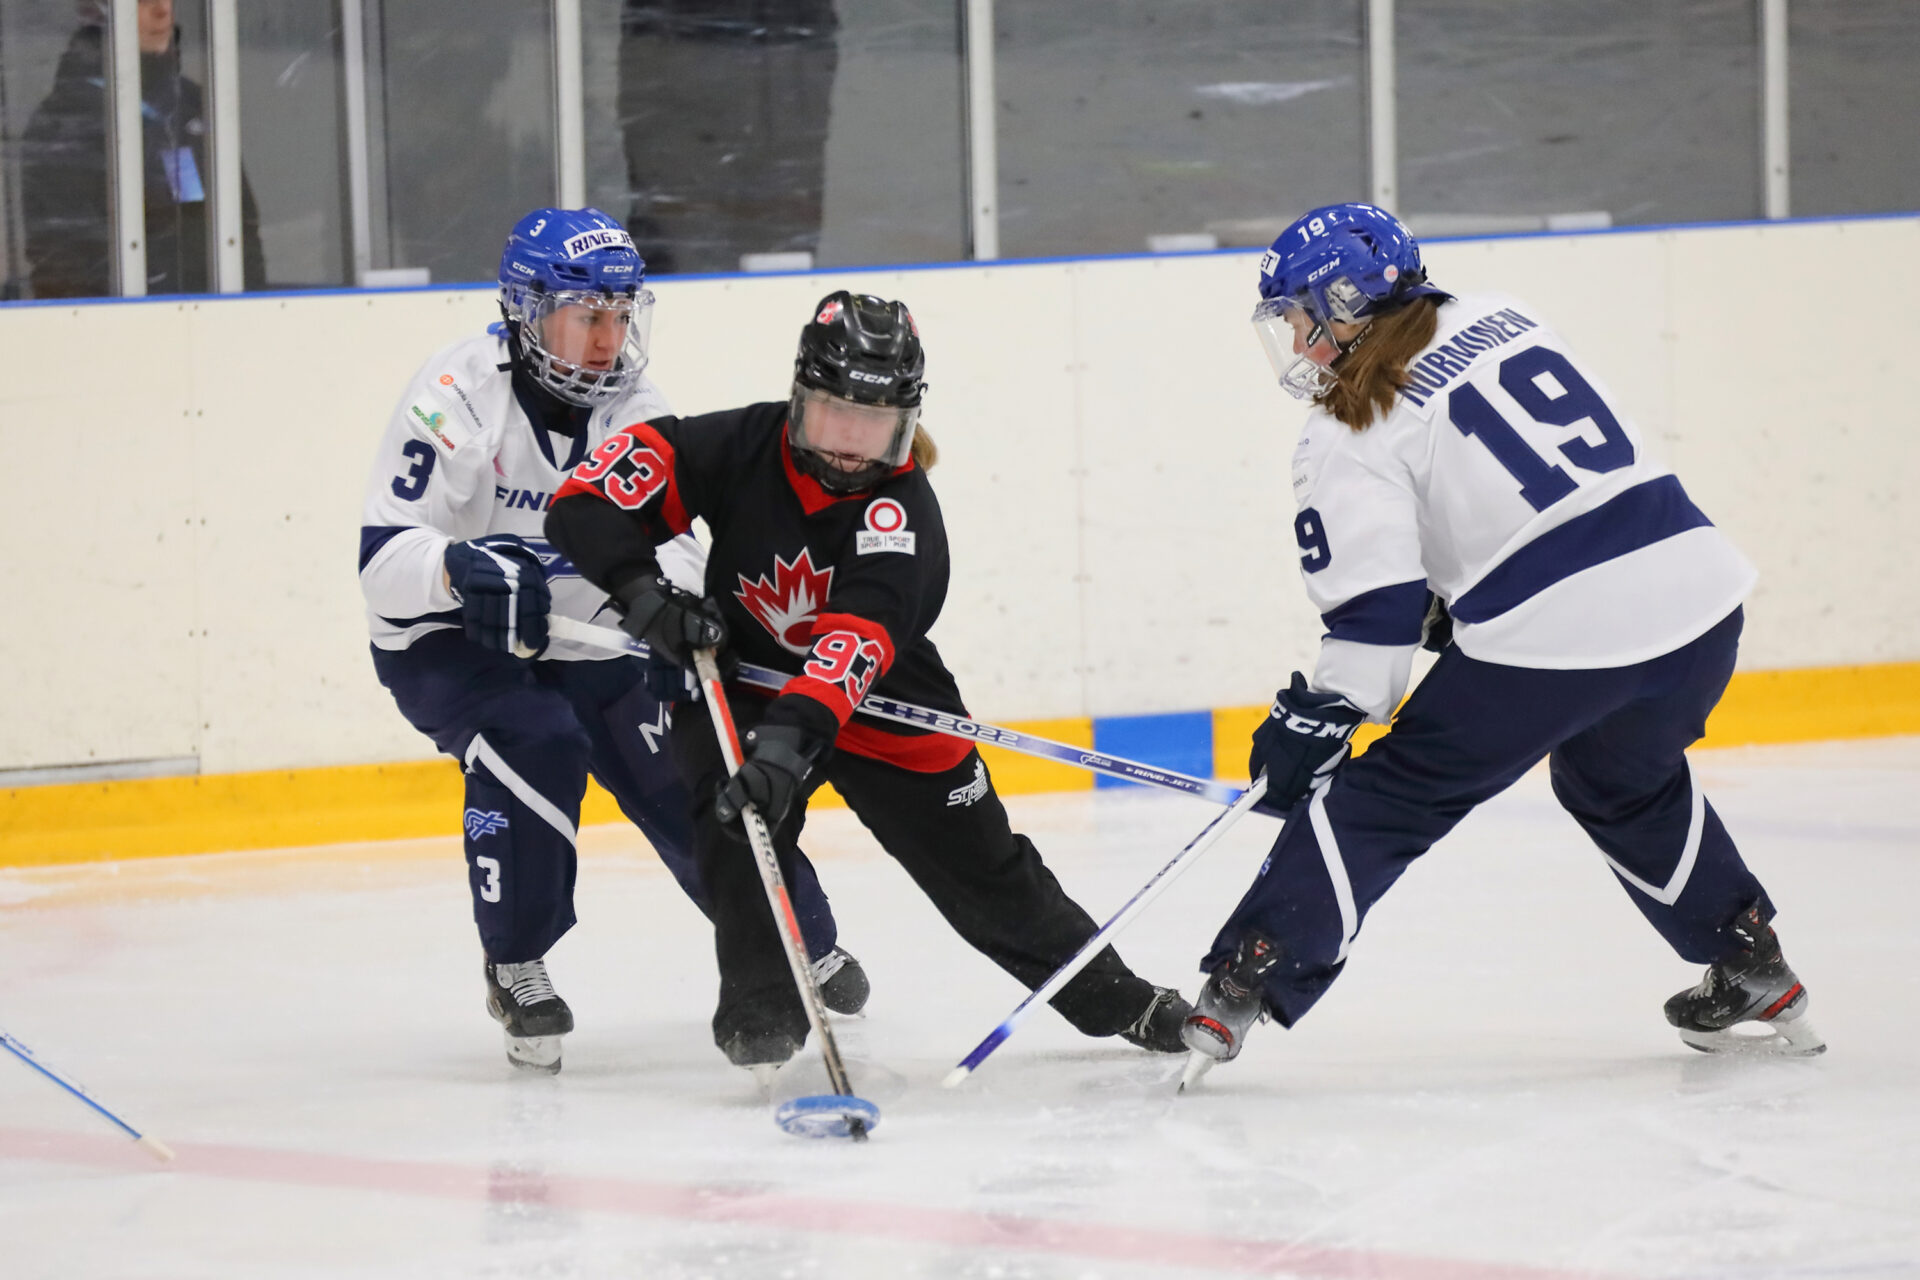 The World Ringette Championships kicked off with 3 matches Ringette